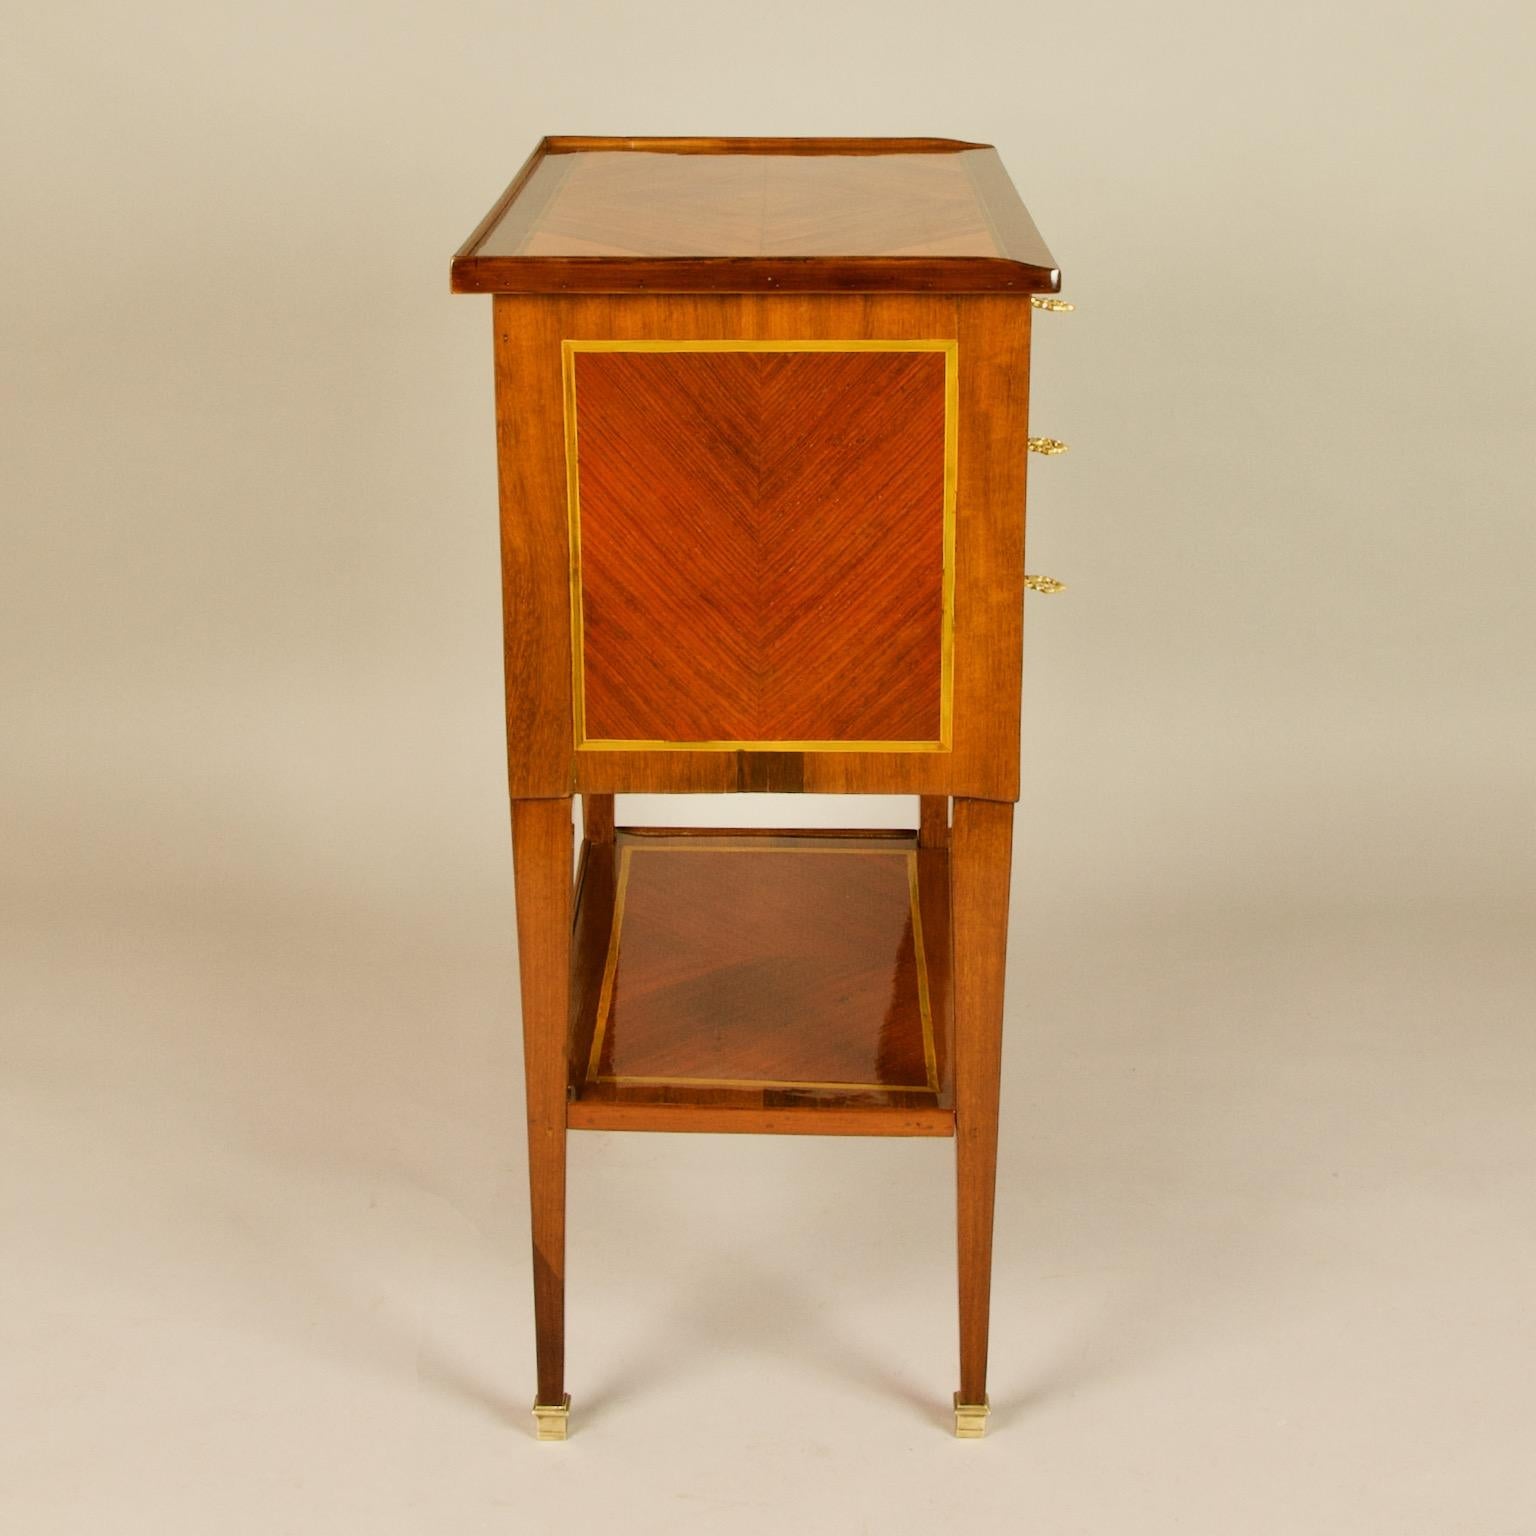 French 18th Century Louis XVI Parquetry Small Writing Table or Table Écritoire

Fine small Louis period parquetry side or writing table, a so-called 